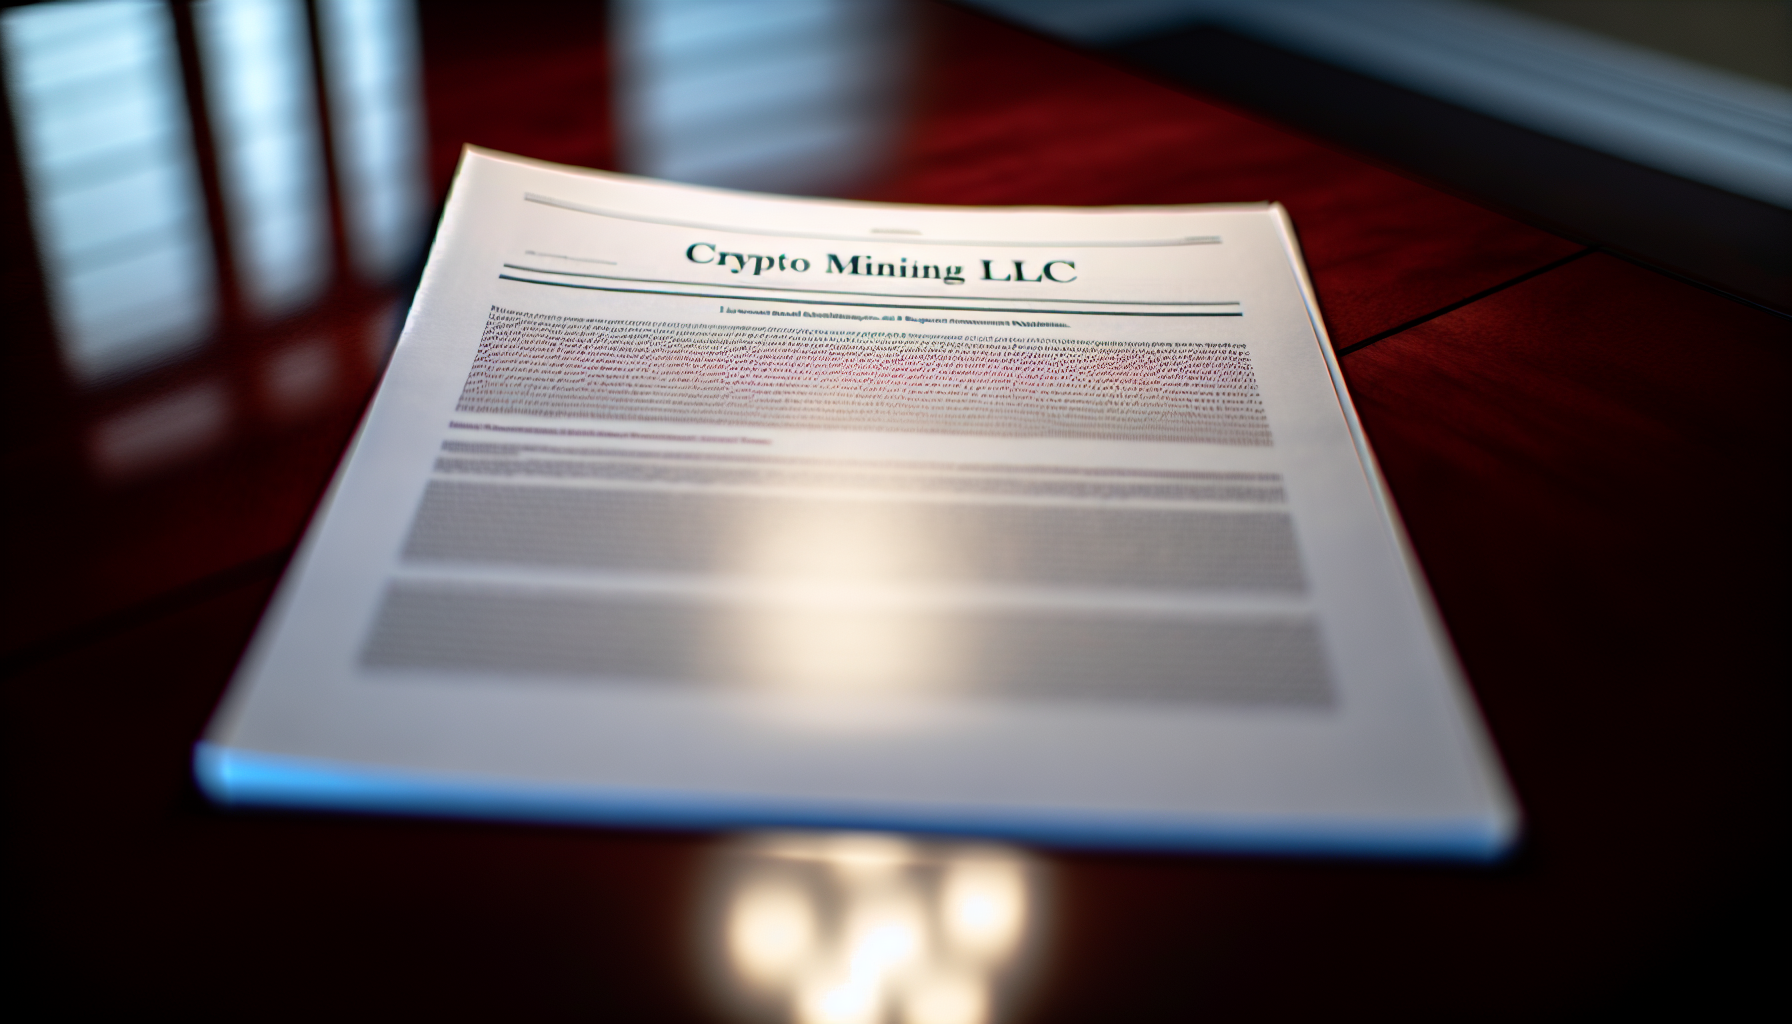 Photo of an insurance policy document with crypto mining LLC mentioned